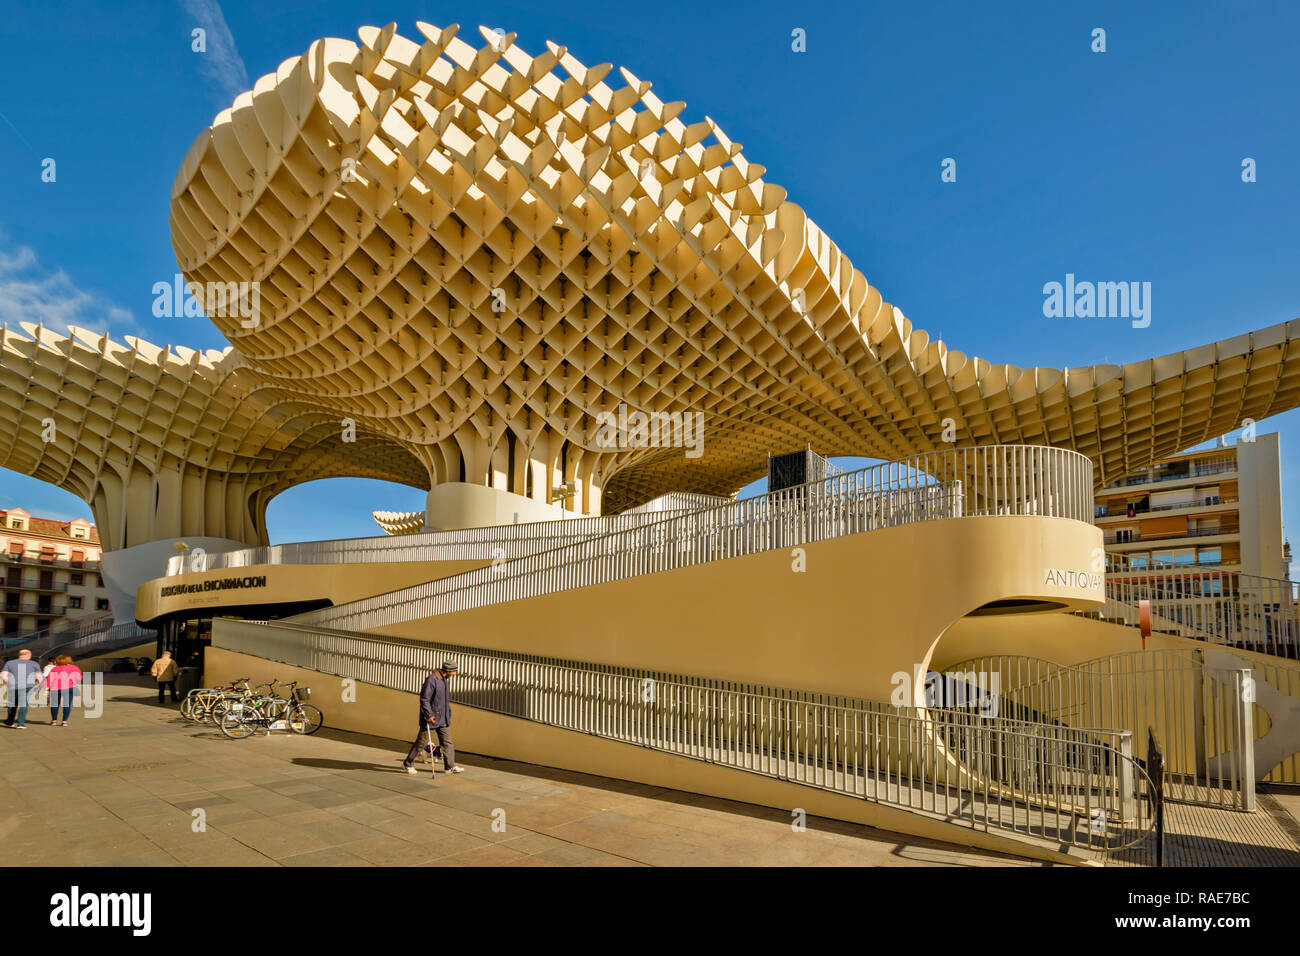 METROPOL PARASOL ENCARNACION SQUARE  SEVILLE SPAIN EARLY MORNING THE ROOF STRUCTURE AND RAMPS Stock Photo